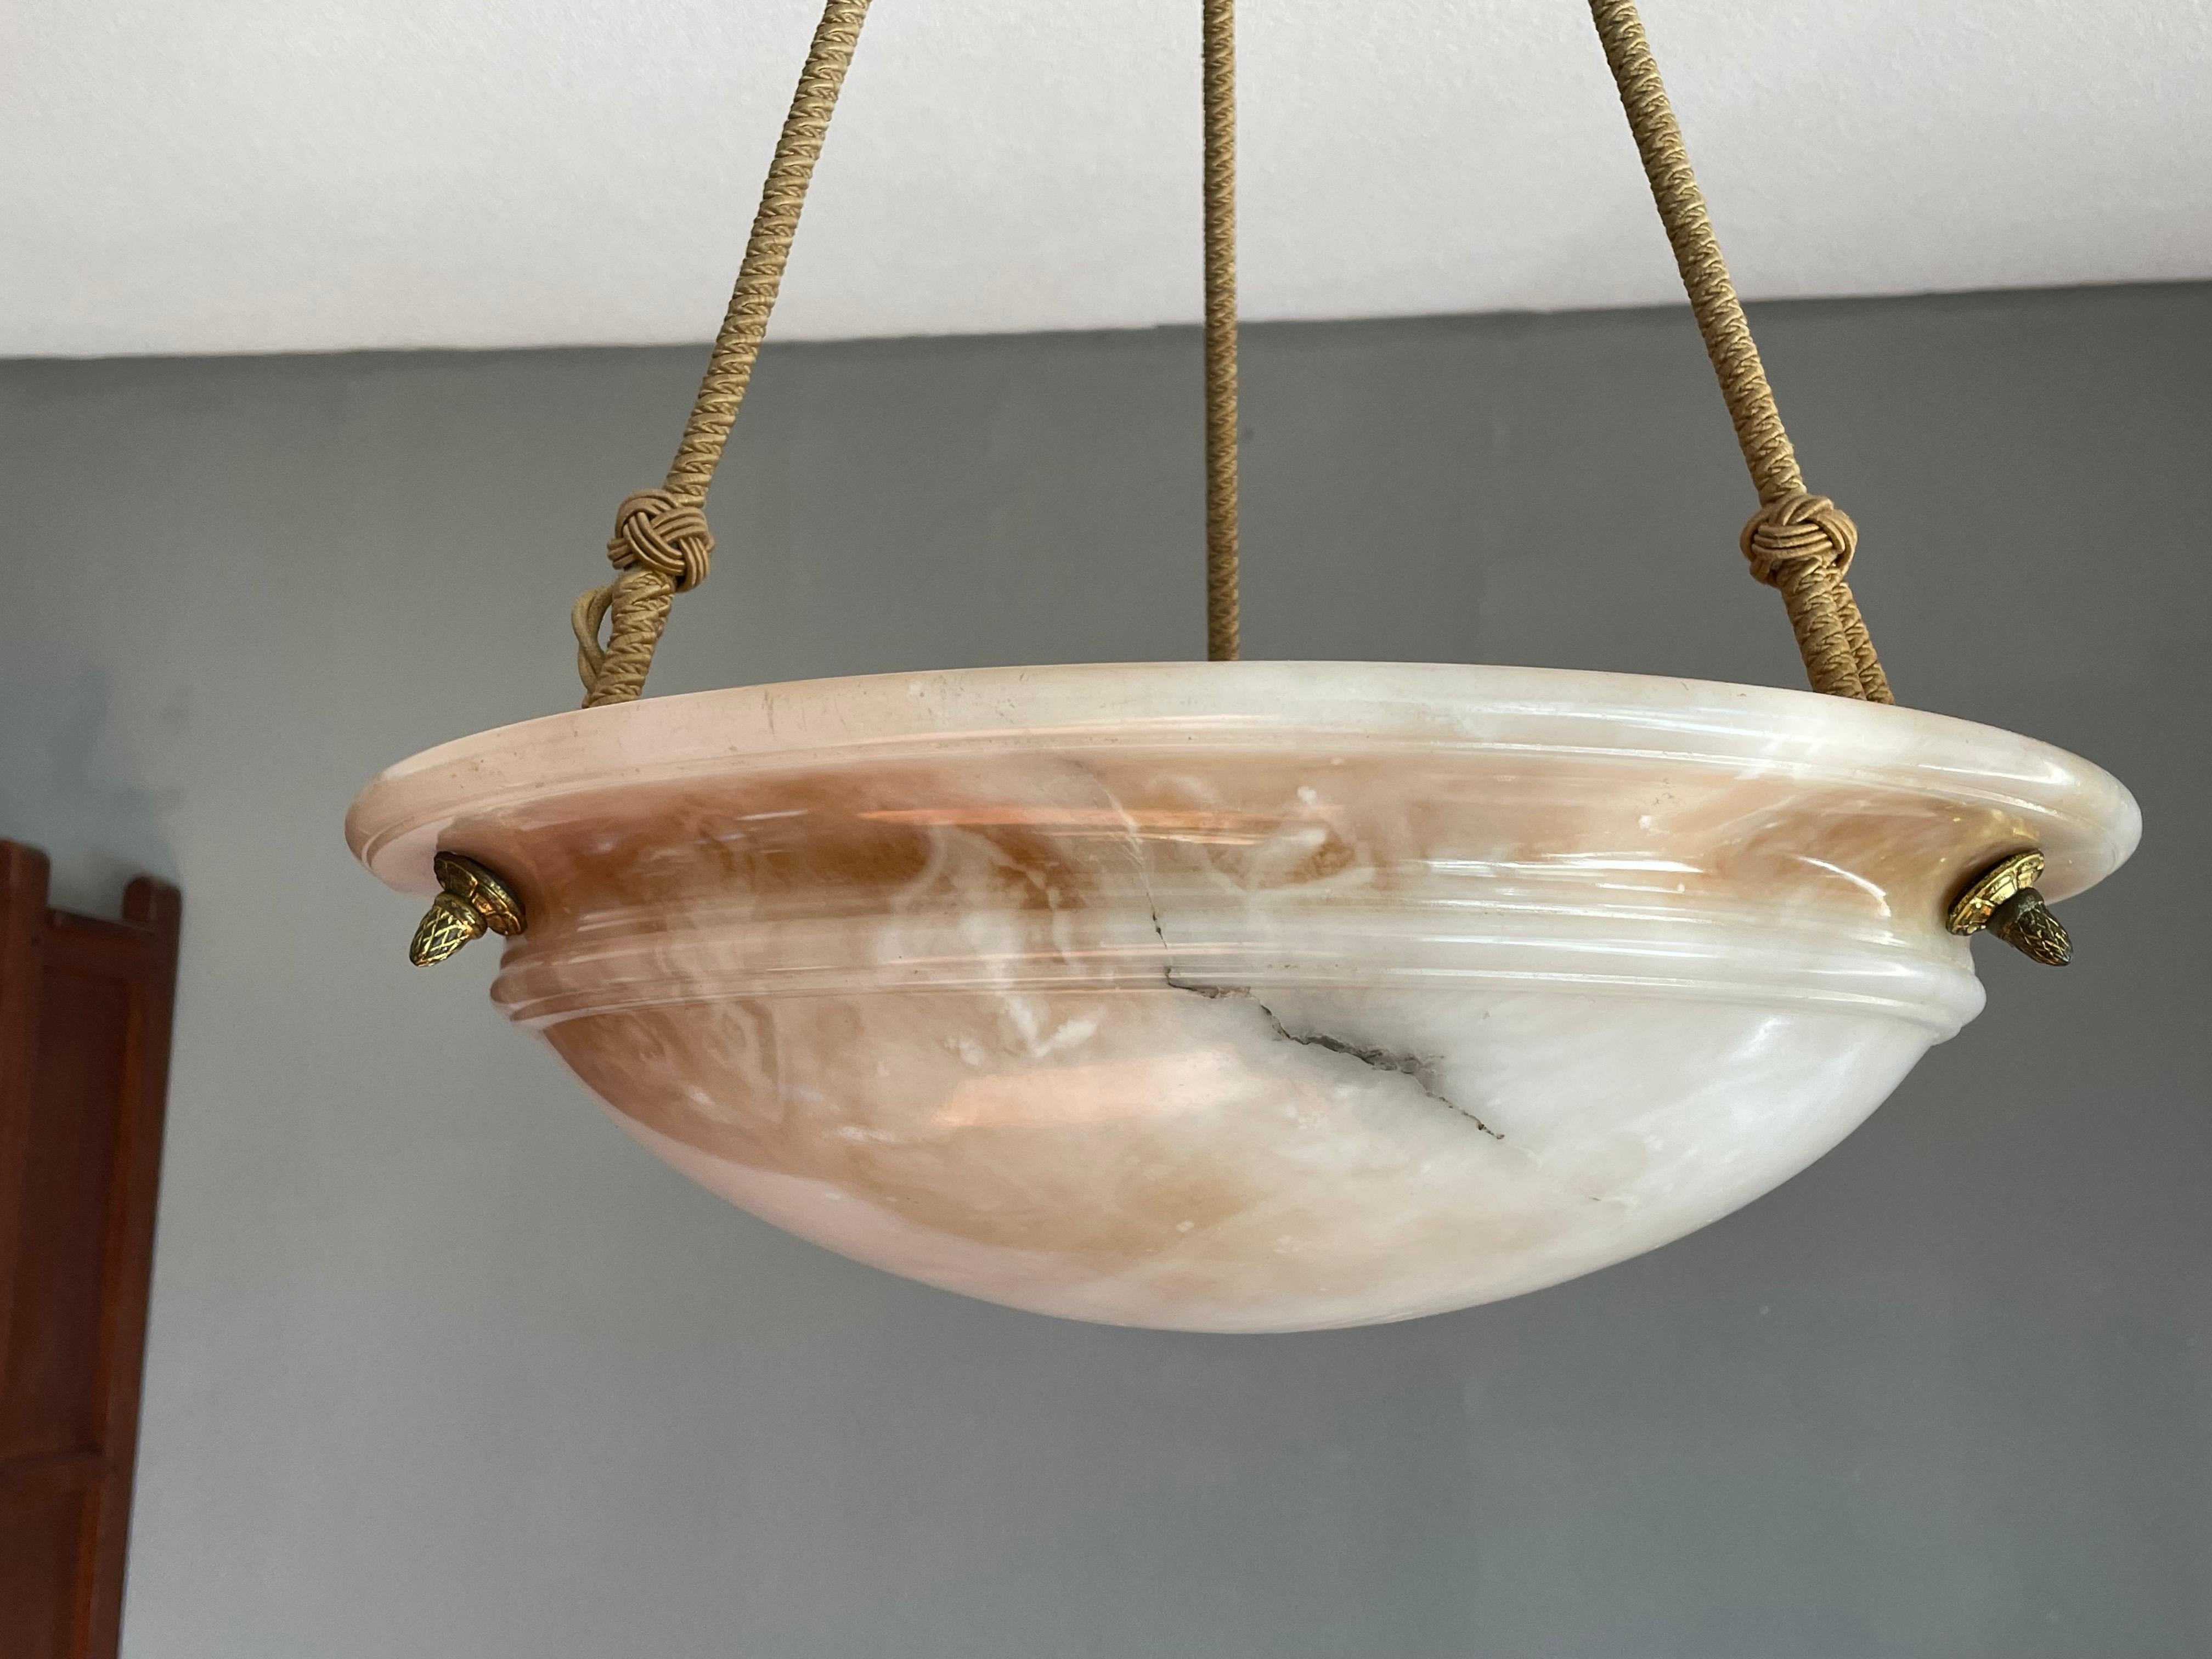 True French Art Deco elegance for the collectors and enthousiasts.

If you are looking for a good size, beautiful, timeless and ready to use alabaster chandelier then this striking French specimen from circa 1920 could be gracing your home soon. The